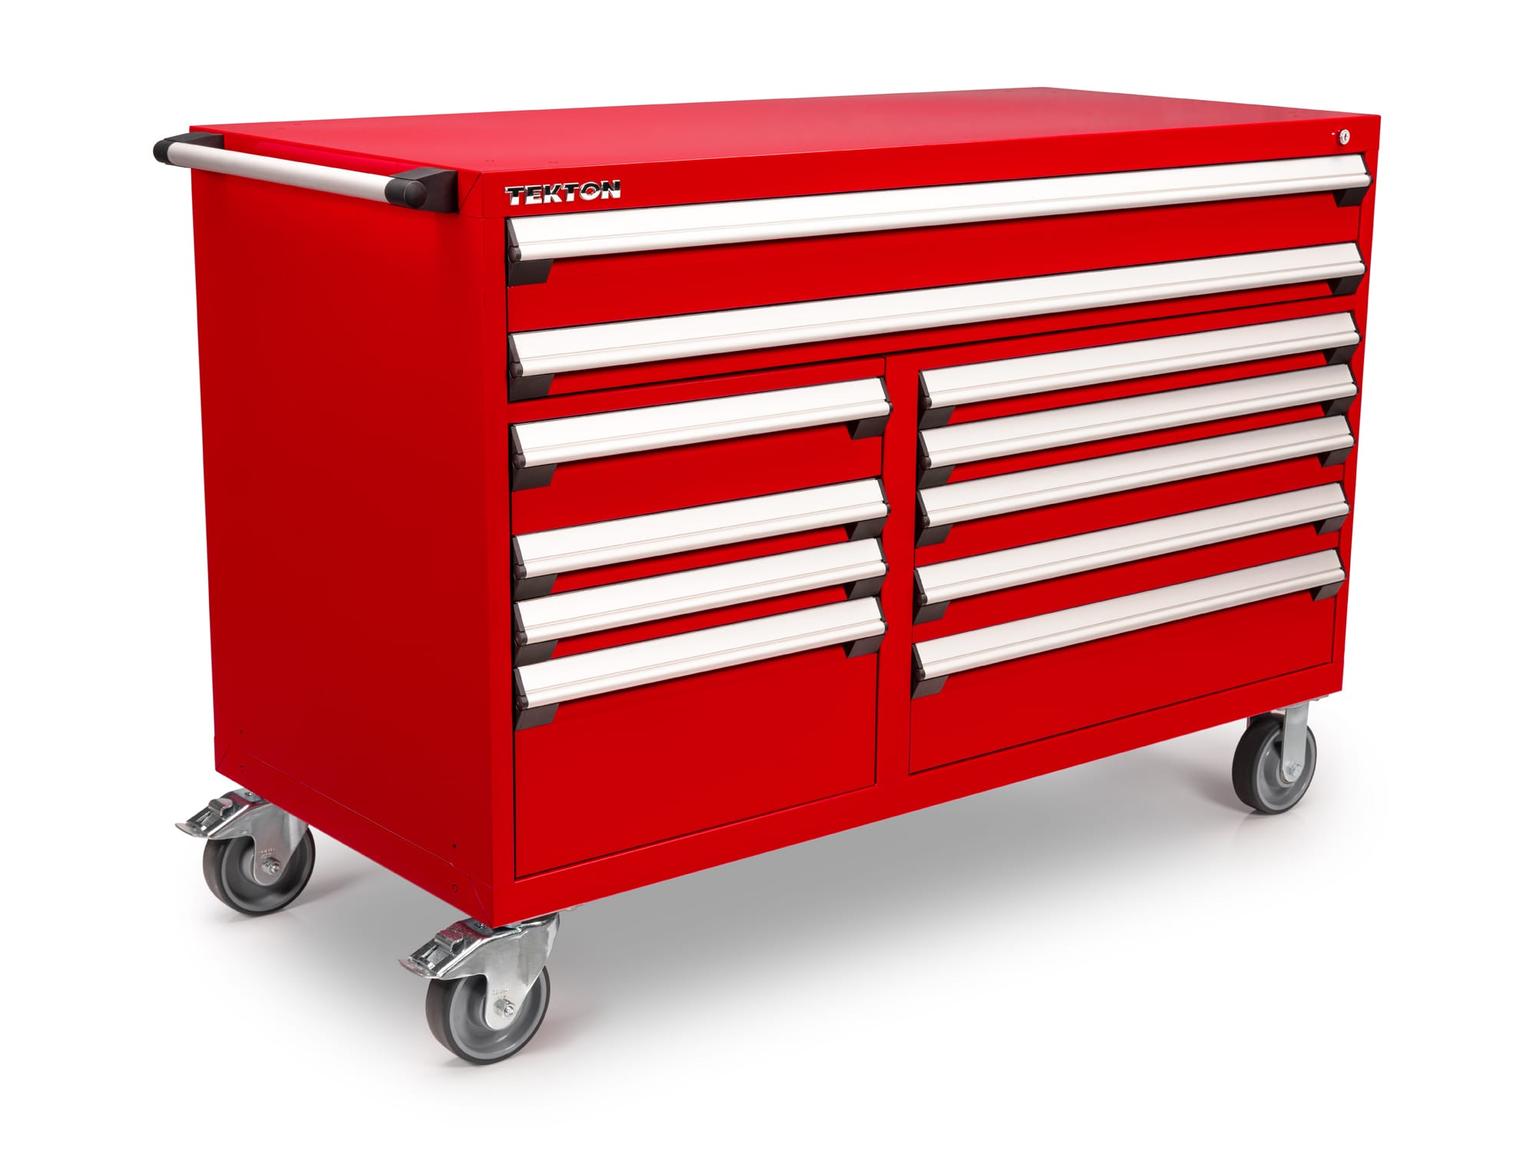 11-Drawer 40/60 Split Bank Tool Cabinet, Red (60 W x 27 D x 41.5 H in.)